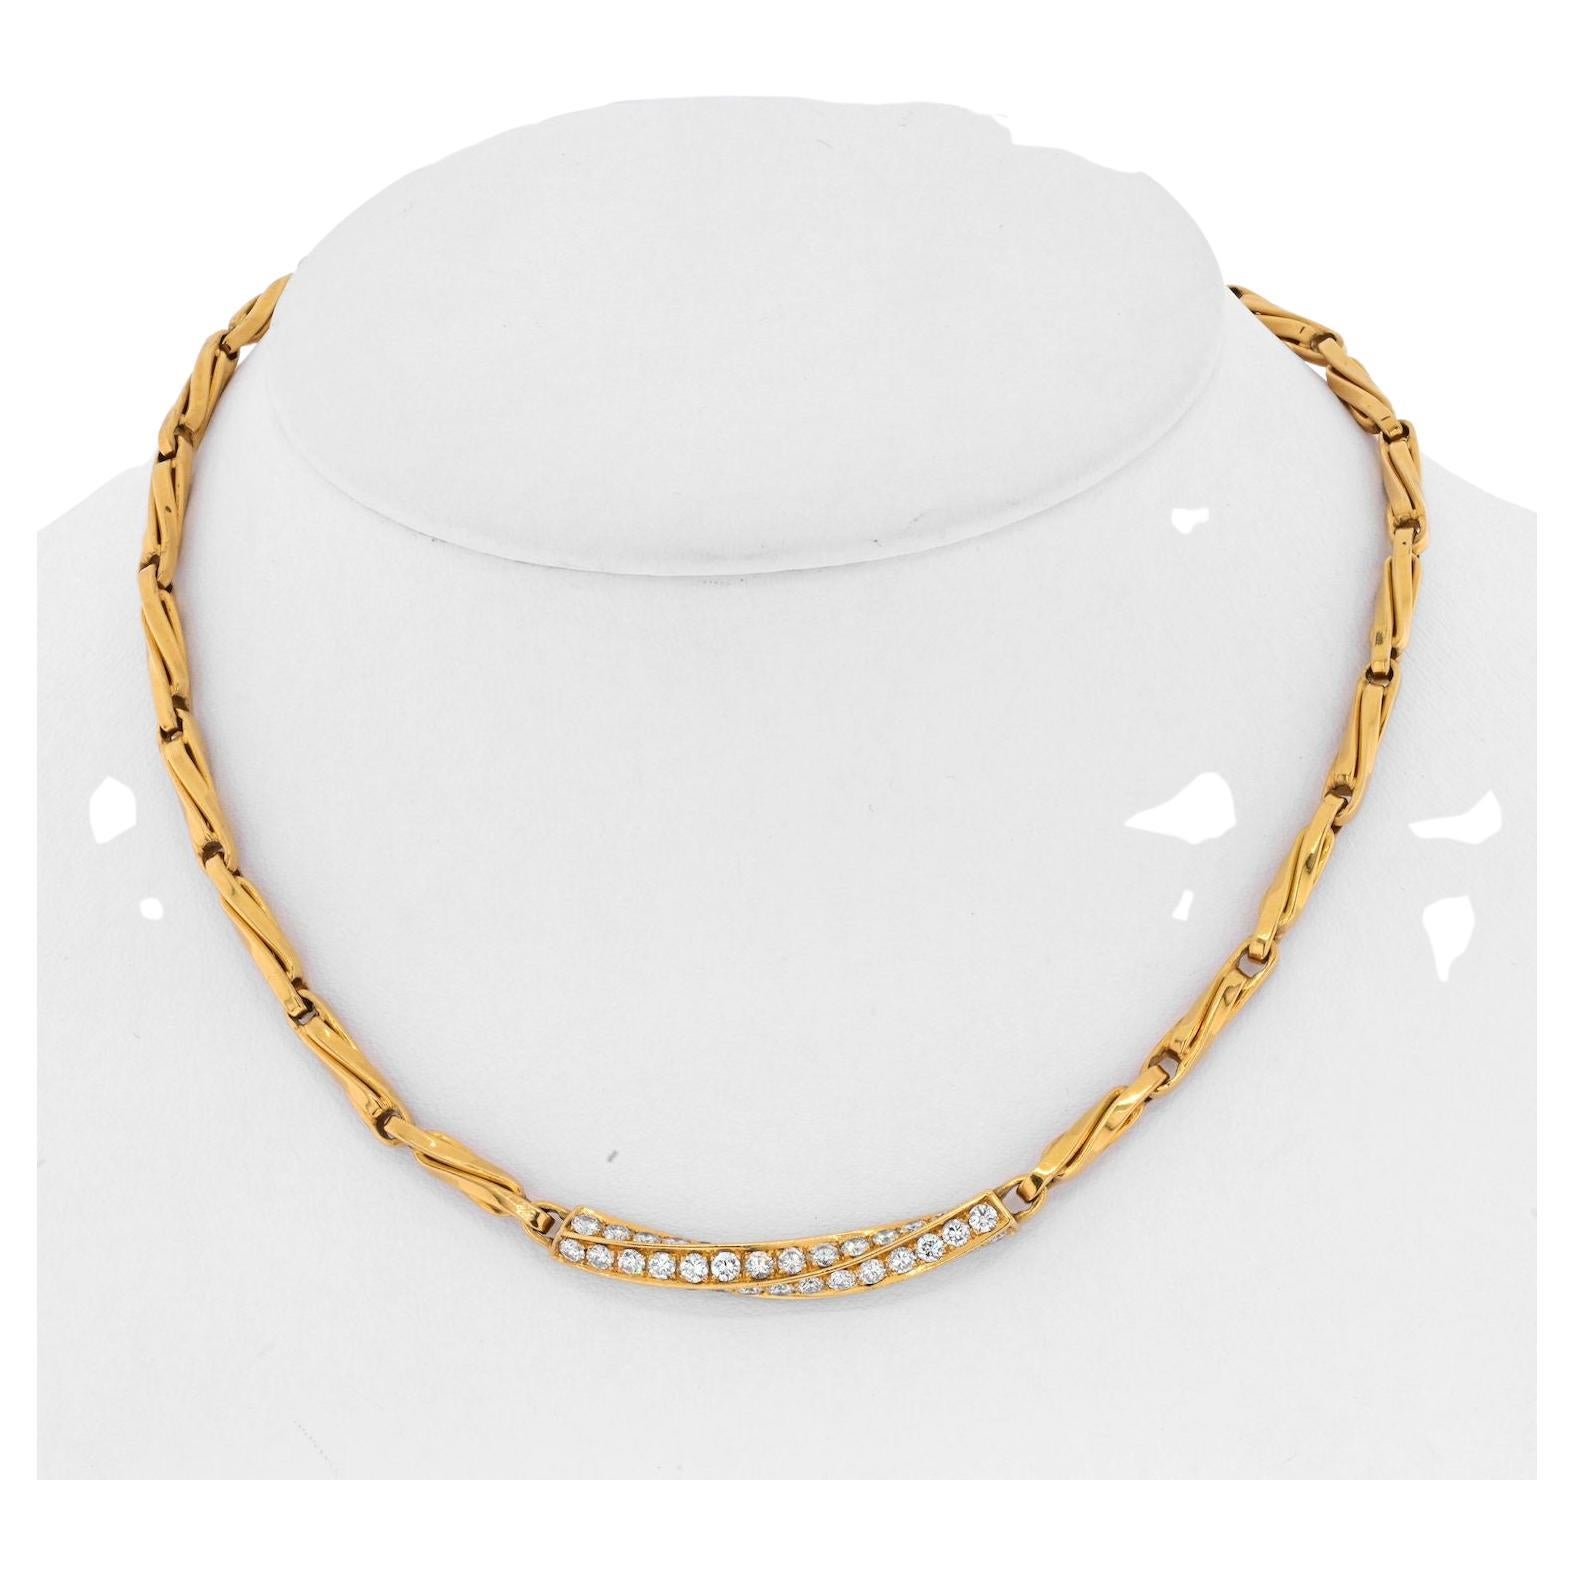 This is a beautiful twisted link yellow gold chain necklace by Bulgari with a diamond station in the center. Vintage.
Length: 16 inches. 
Diamonds: 4 carats approx.